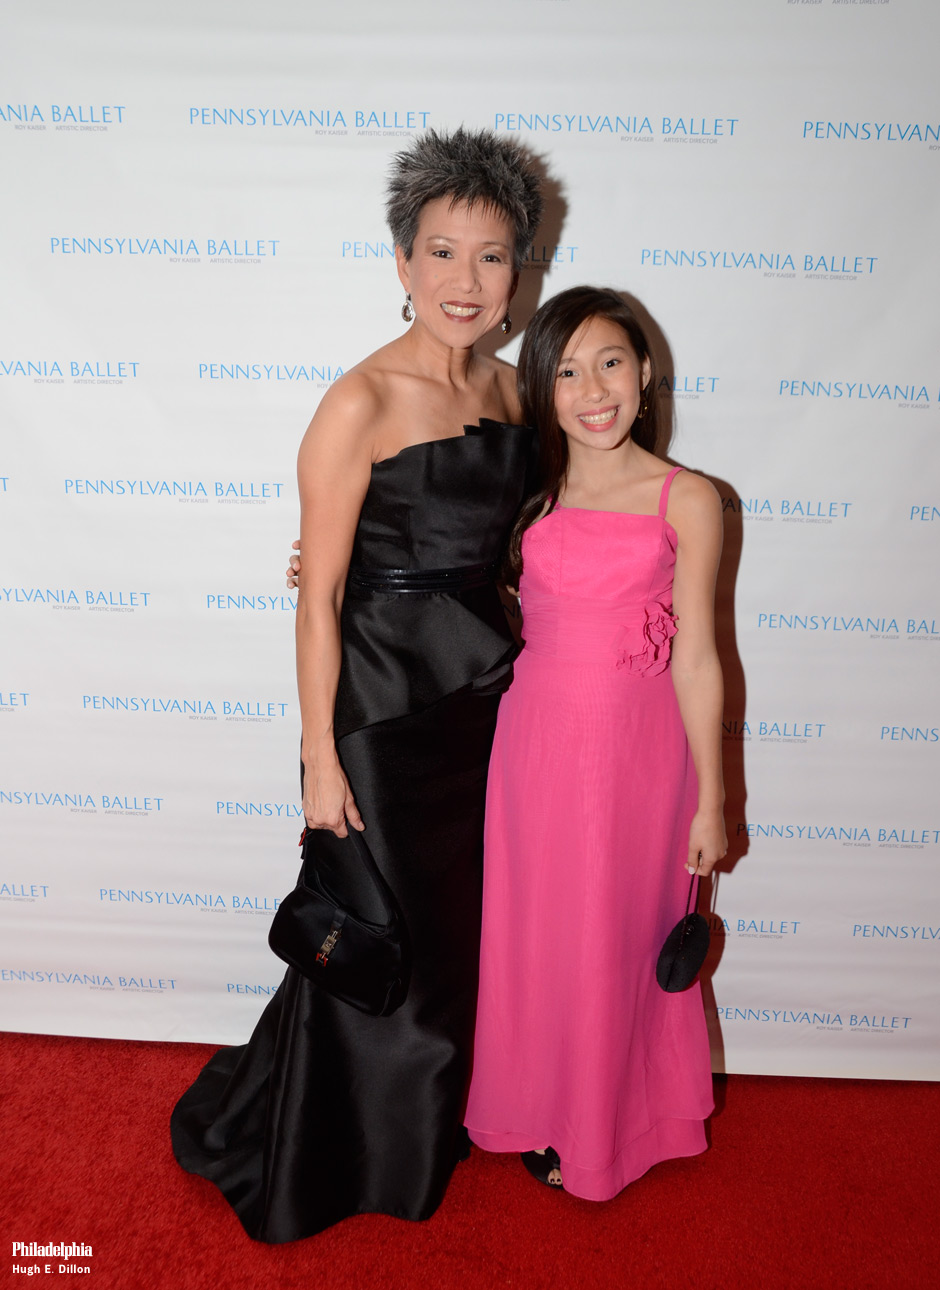 Susan Jin Davis and Sophia Malatesta. Sophia was so excited to experience her first gala.